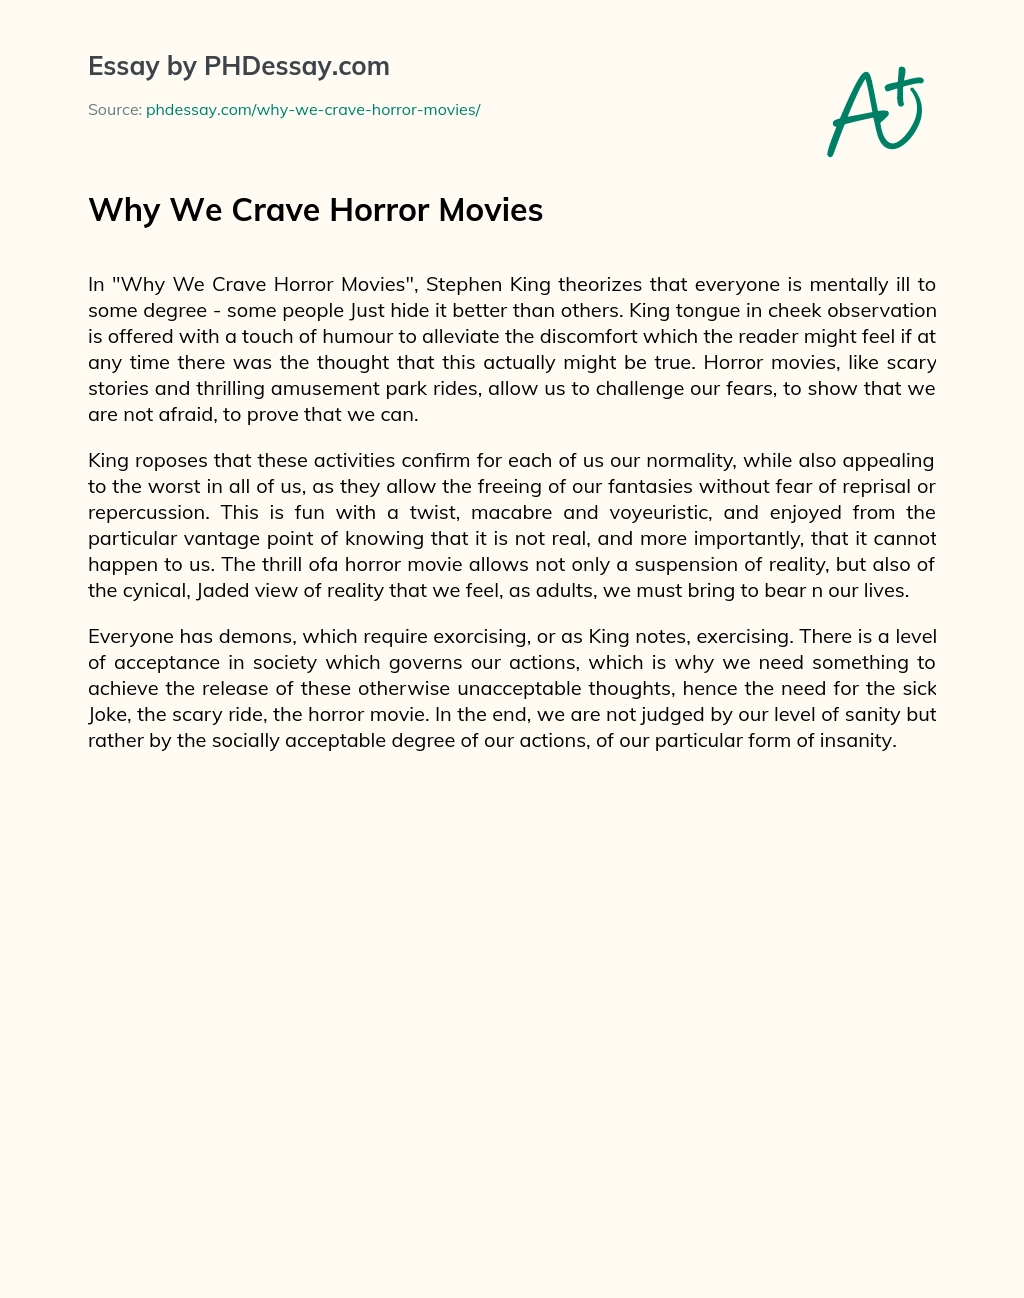 Why We Crave Horror Movies essay